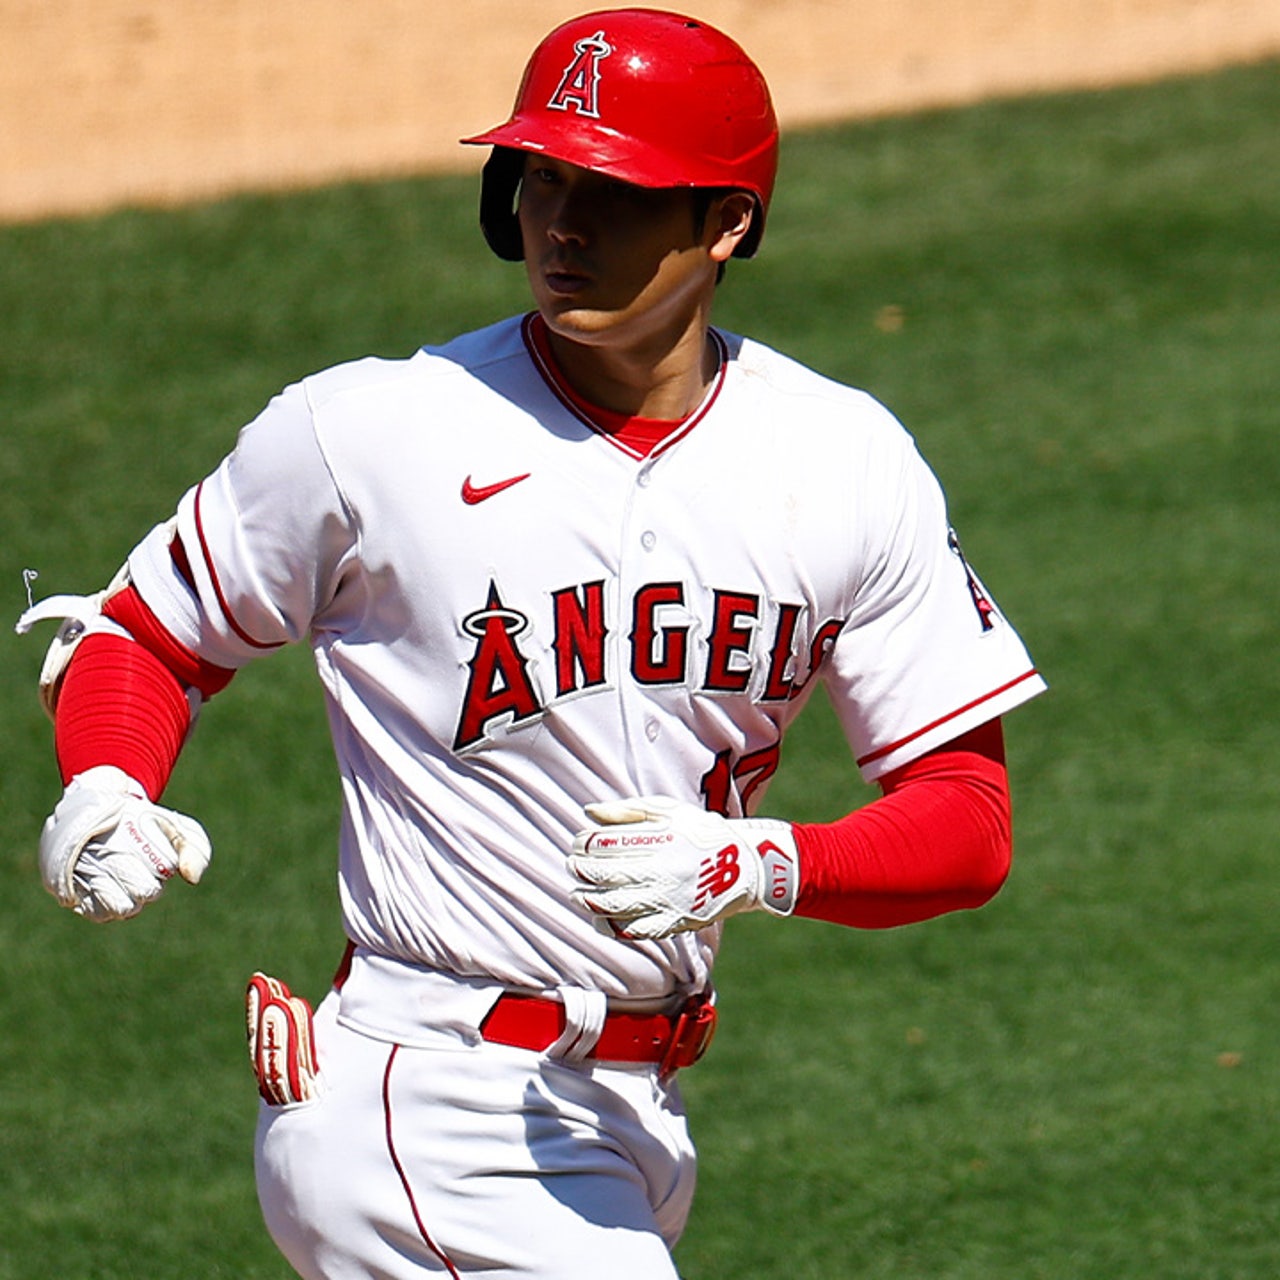 Best Angels players by uniform number